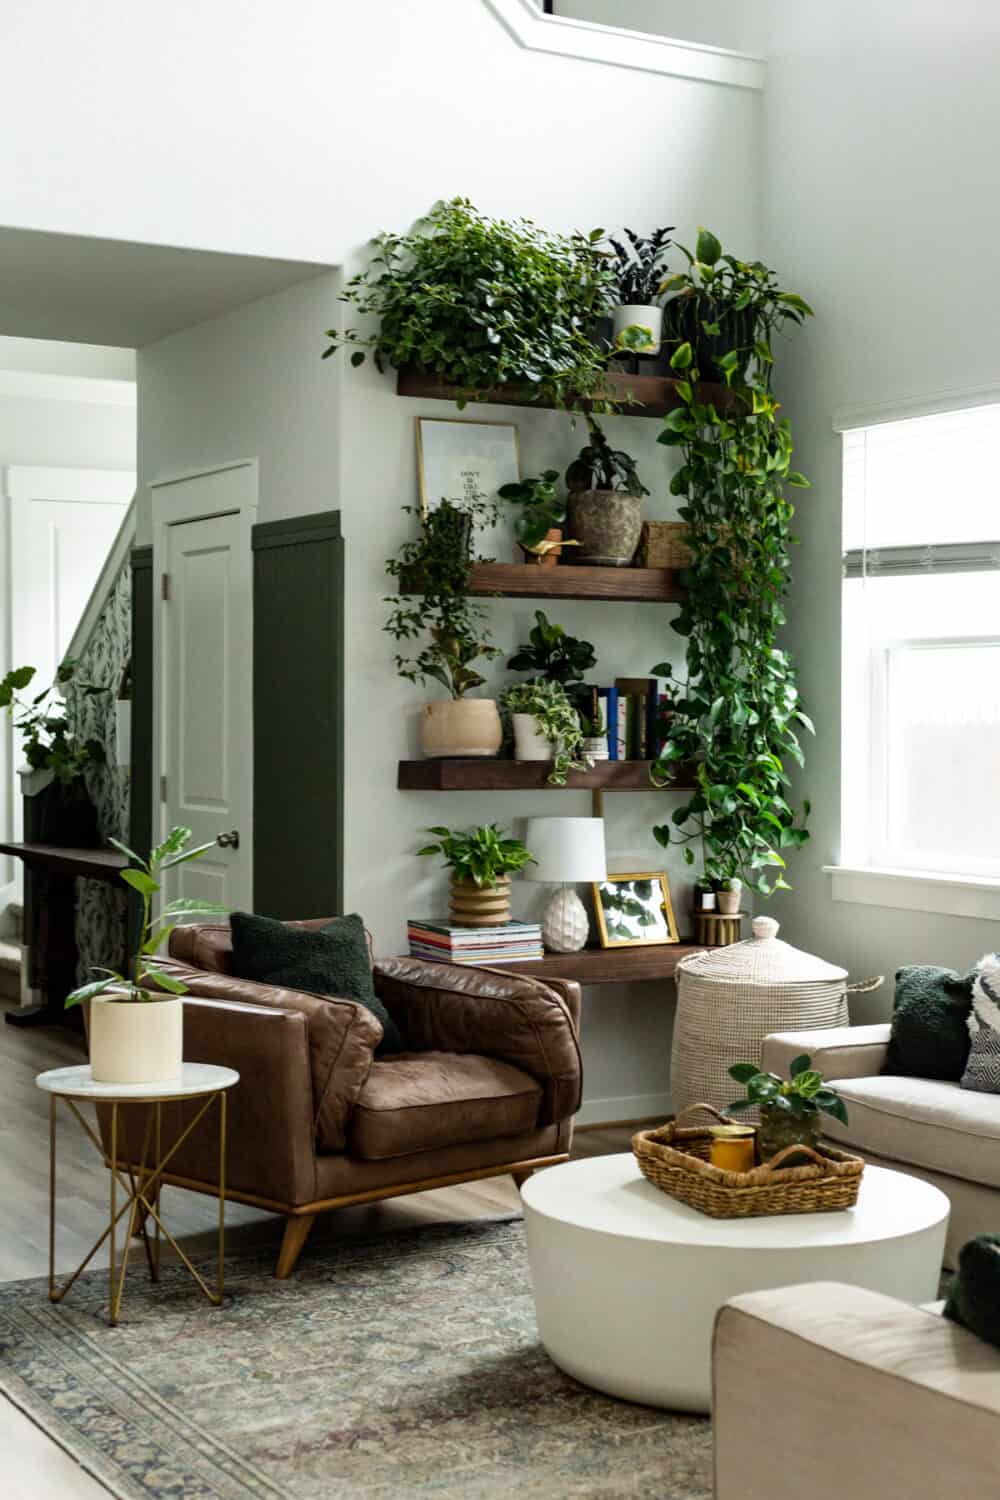 a living room with plant wall shelves creating a plant display